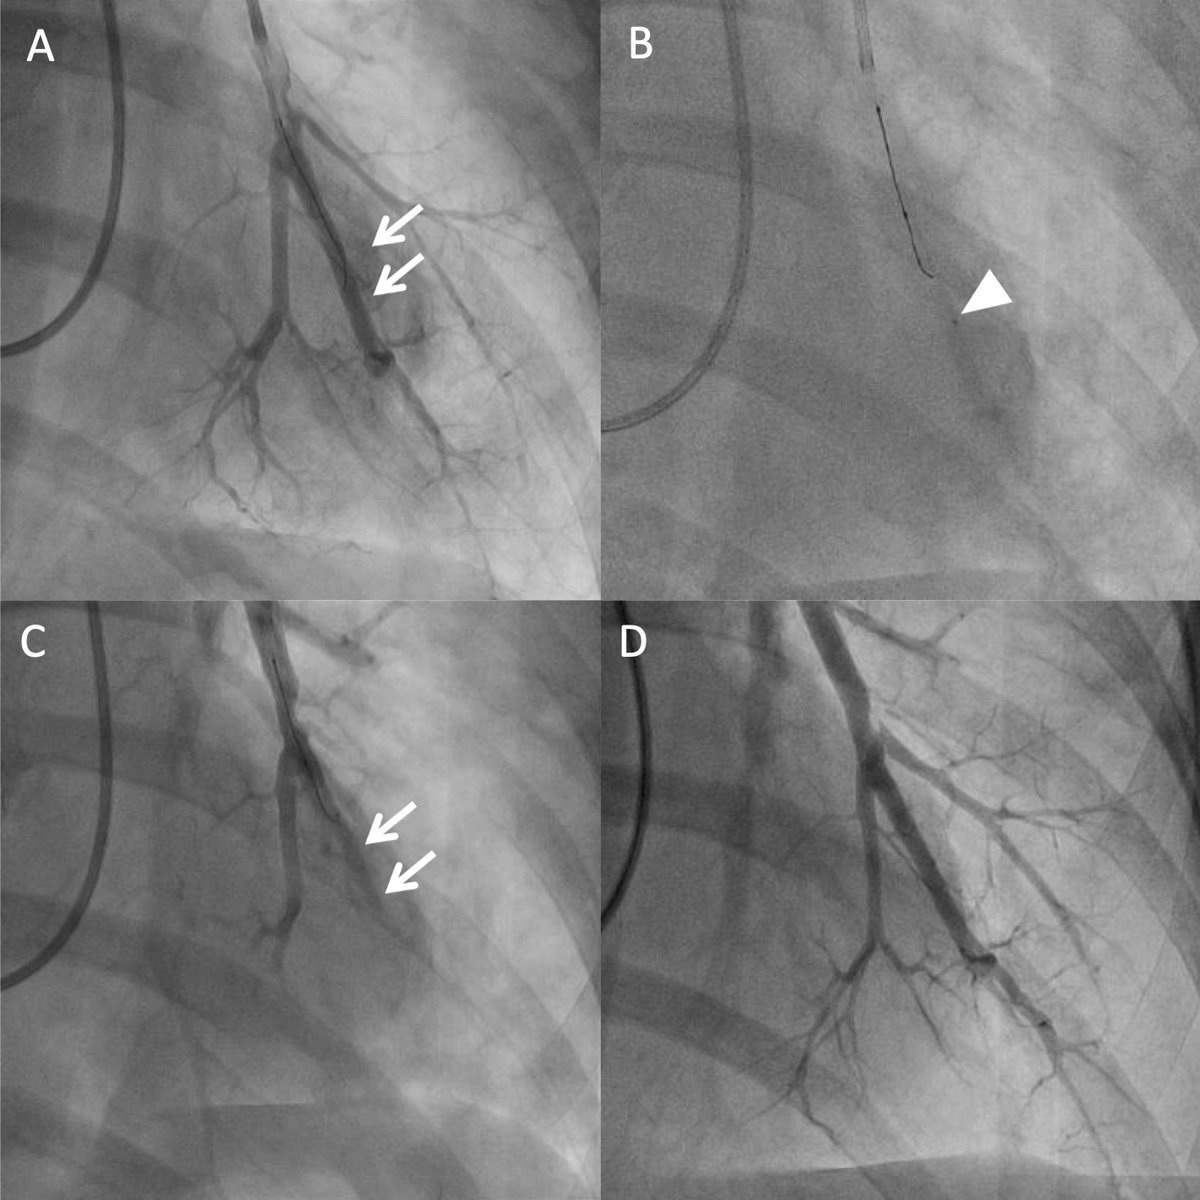 Gelatin sponge embolization is promising to minimize vascular injury during angioplasty for #CTEPH

Representative case figure: A, vascular injury; B, embolization; C, after embolization; and D, after 3 month.
Find full contents bit.ly/3ZnA3xc @JACCJournals #JACCAsia